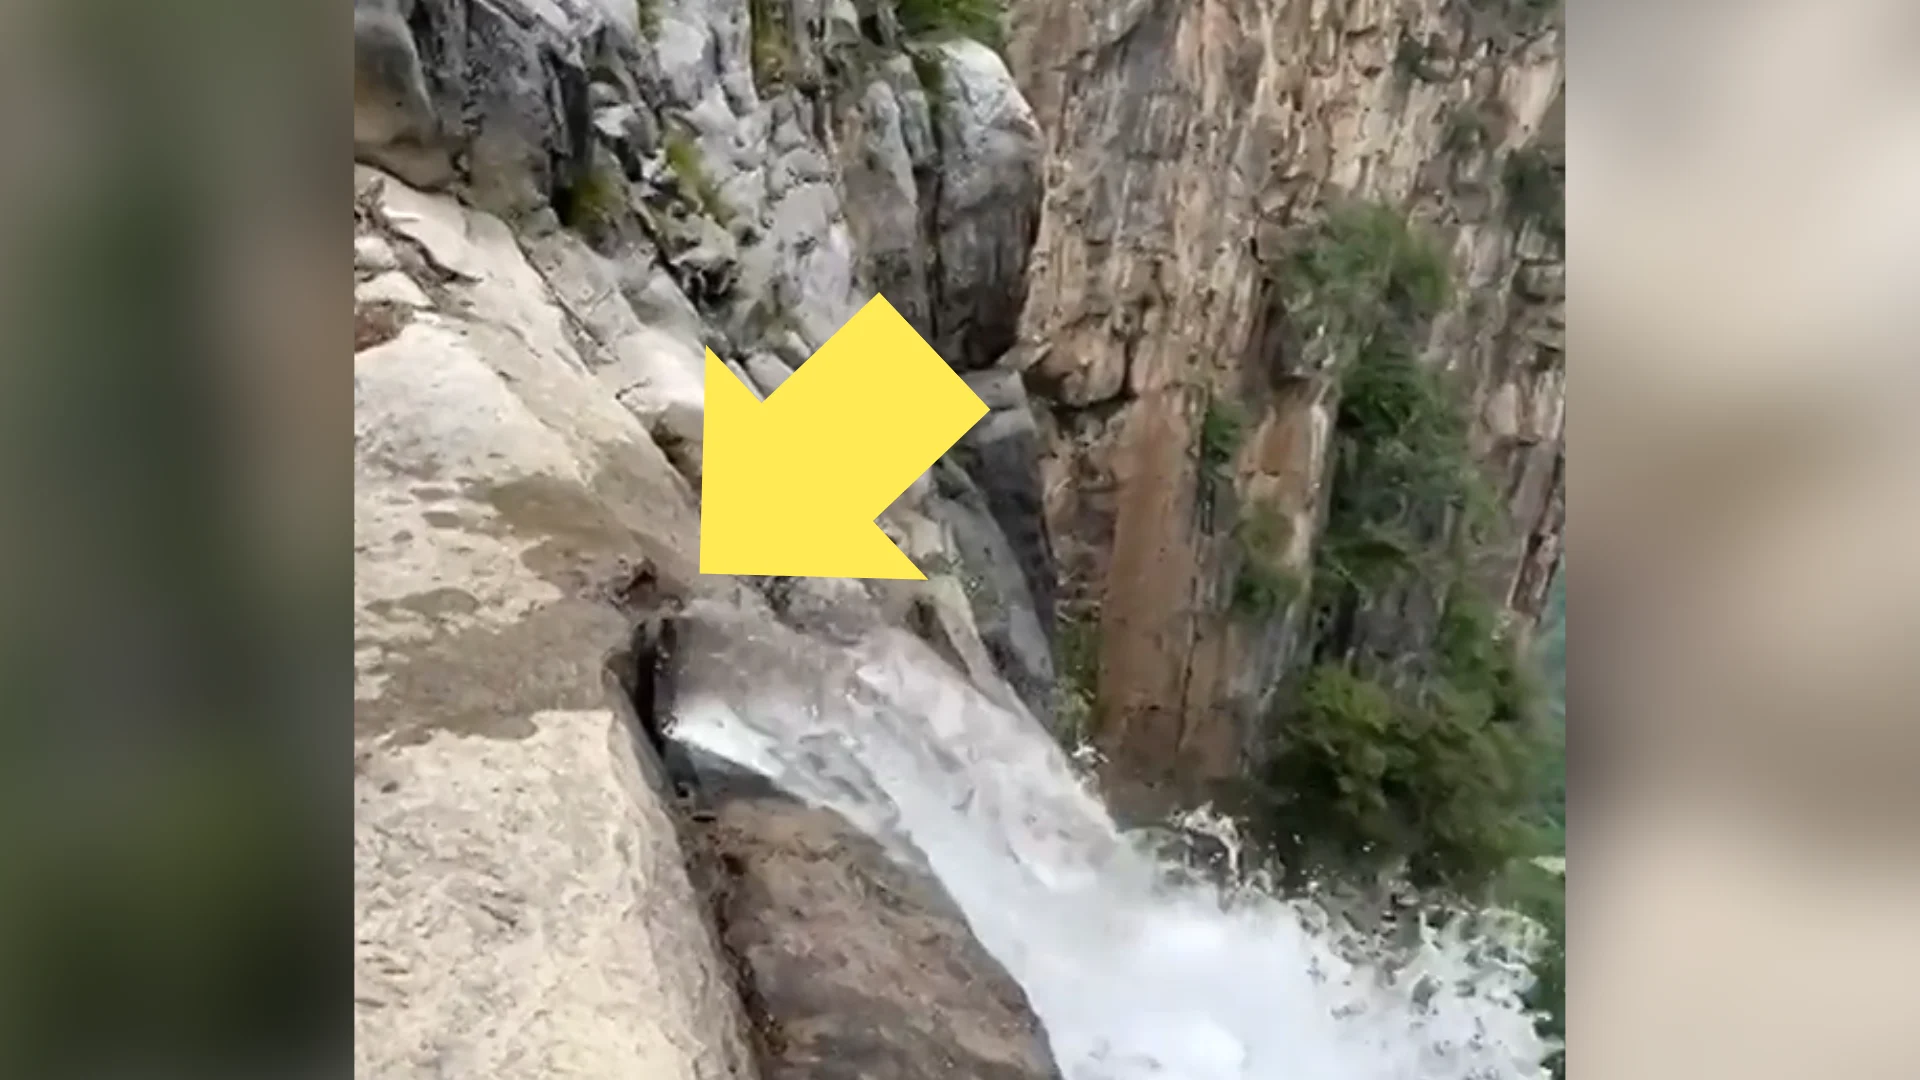 Famous mountain goes viral after visitors find pipes supplying waterfall